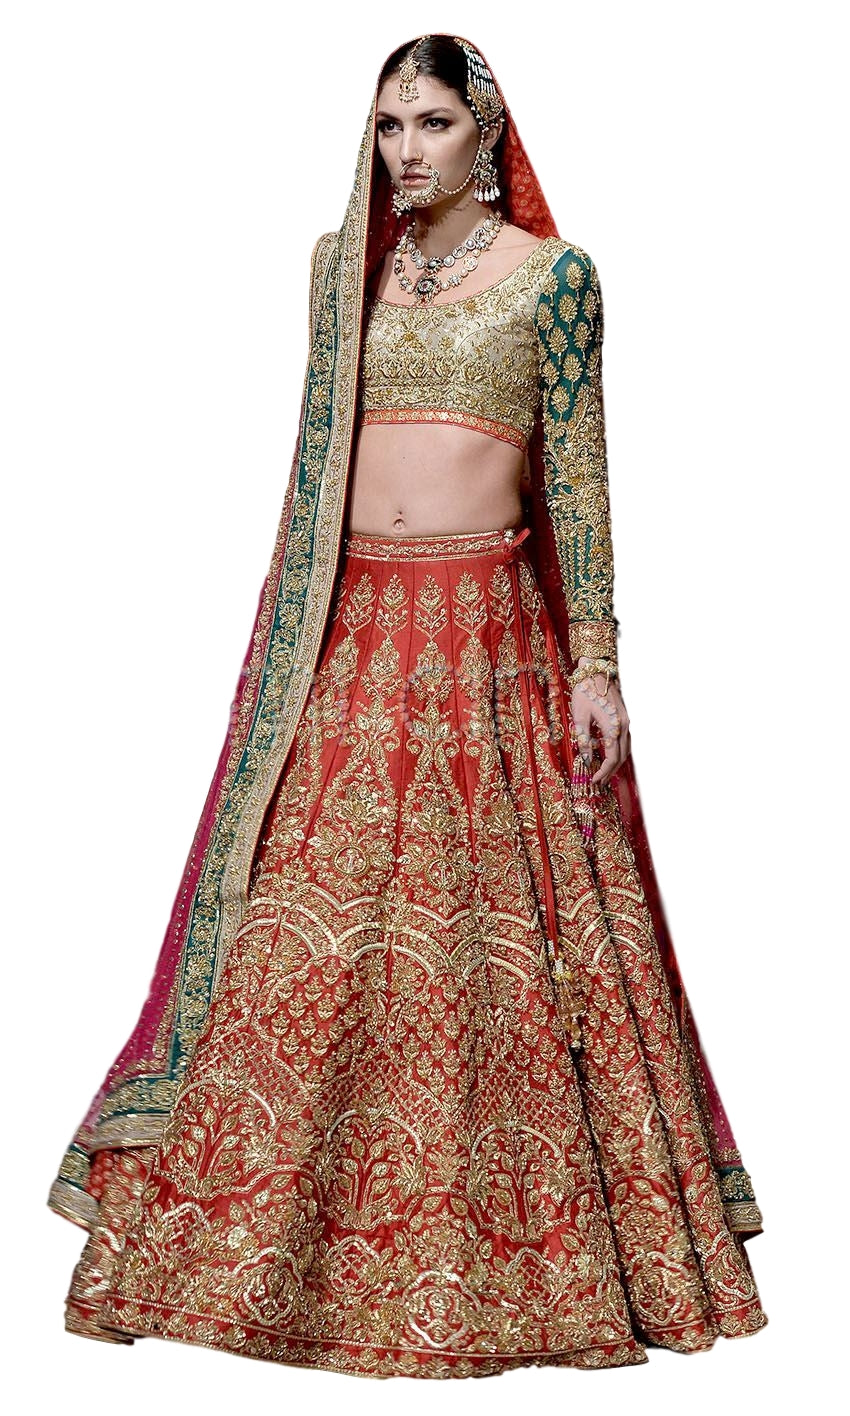 Red Color Wedding Lehenga with Zardozi Embroidery at Panache Haute Couture